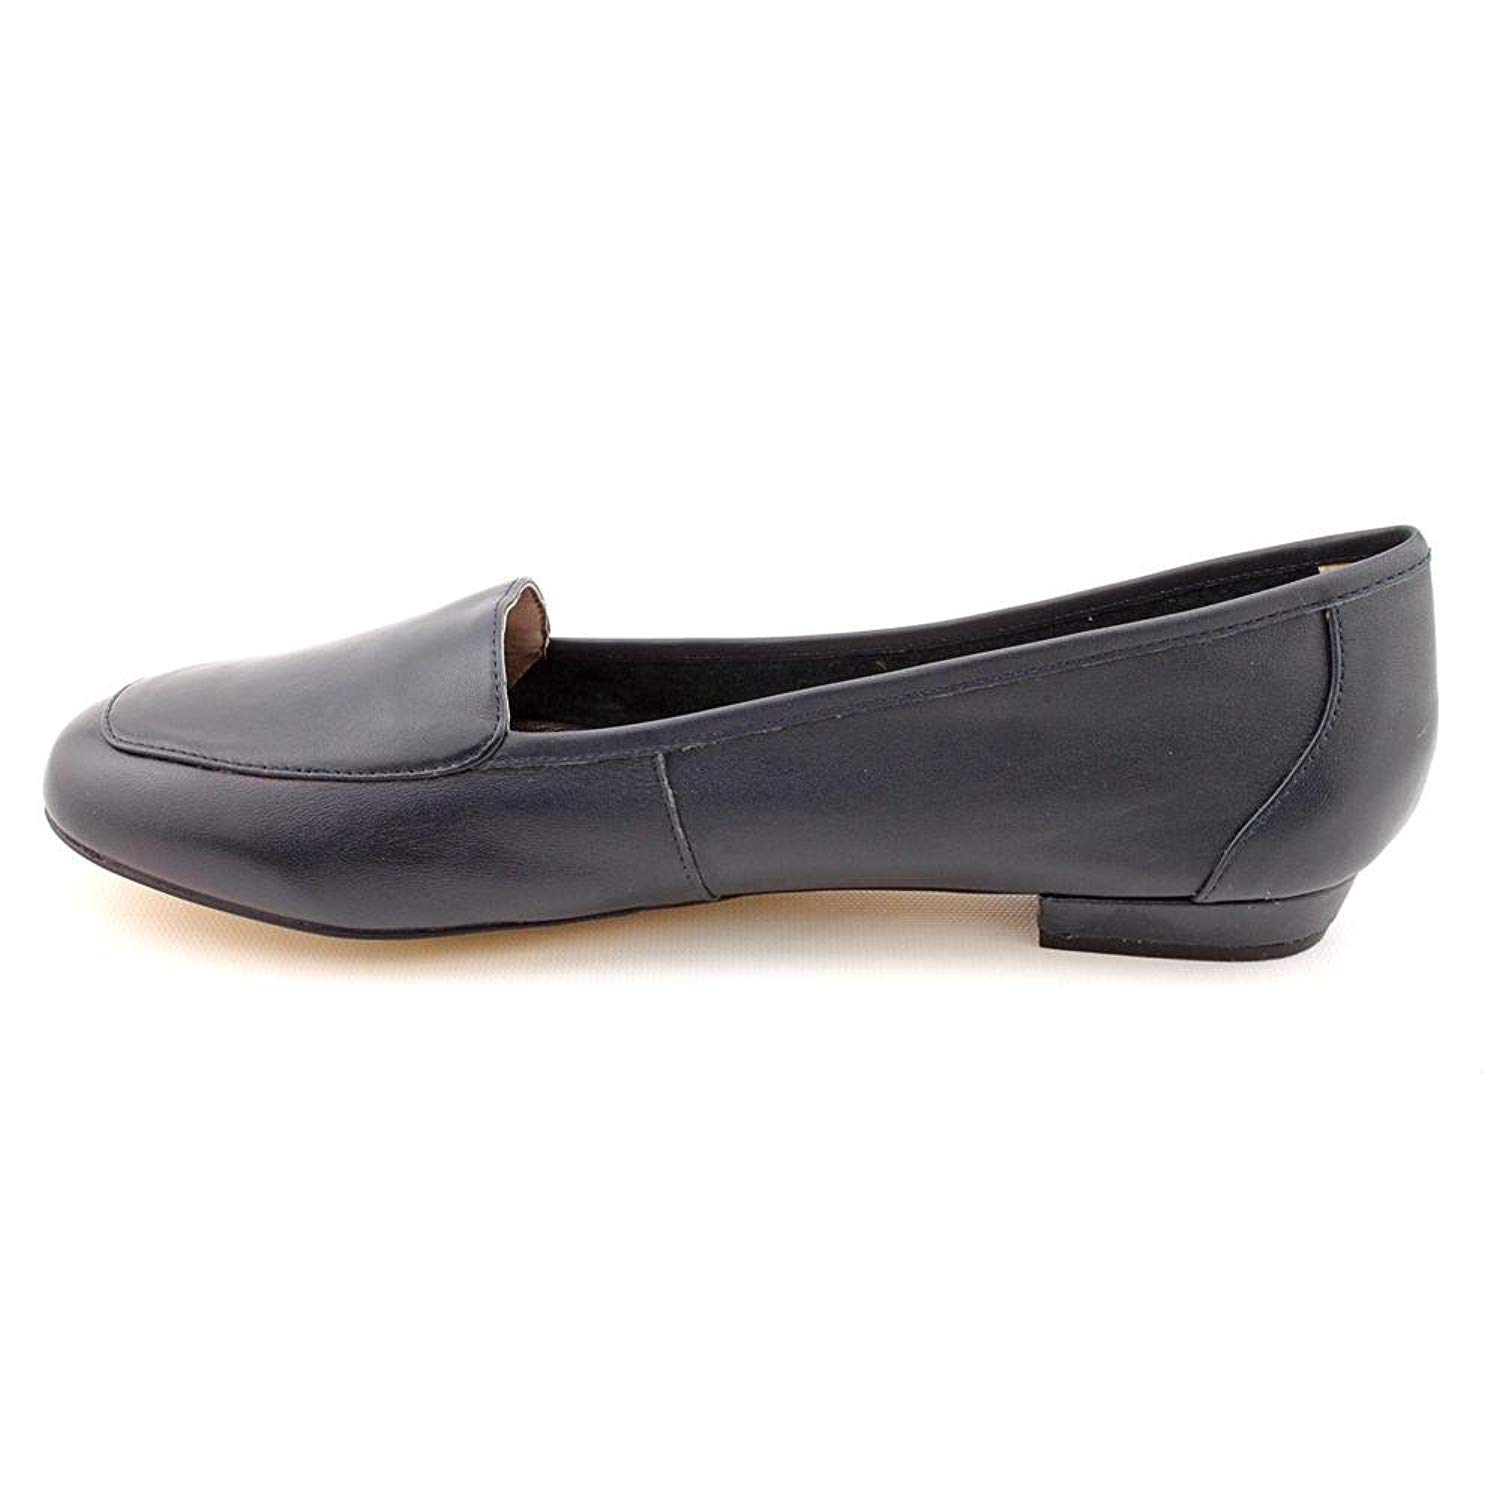 ARRAY Womens Freedom Leather Square Toe Loafers, Navy, Size 8.5 zhVb | eBay